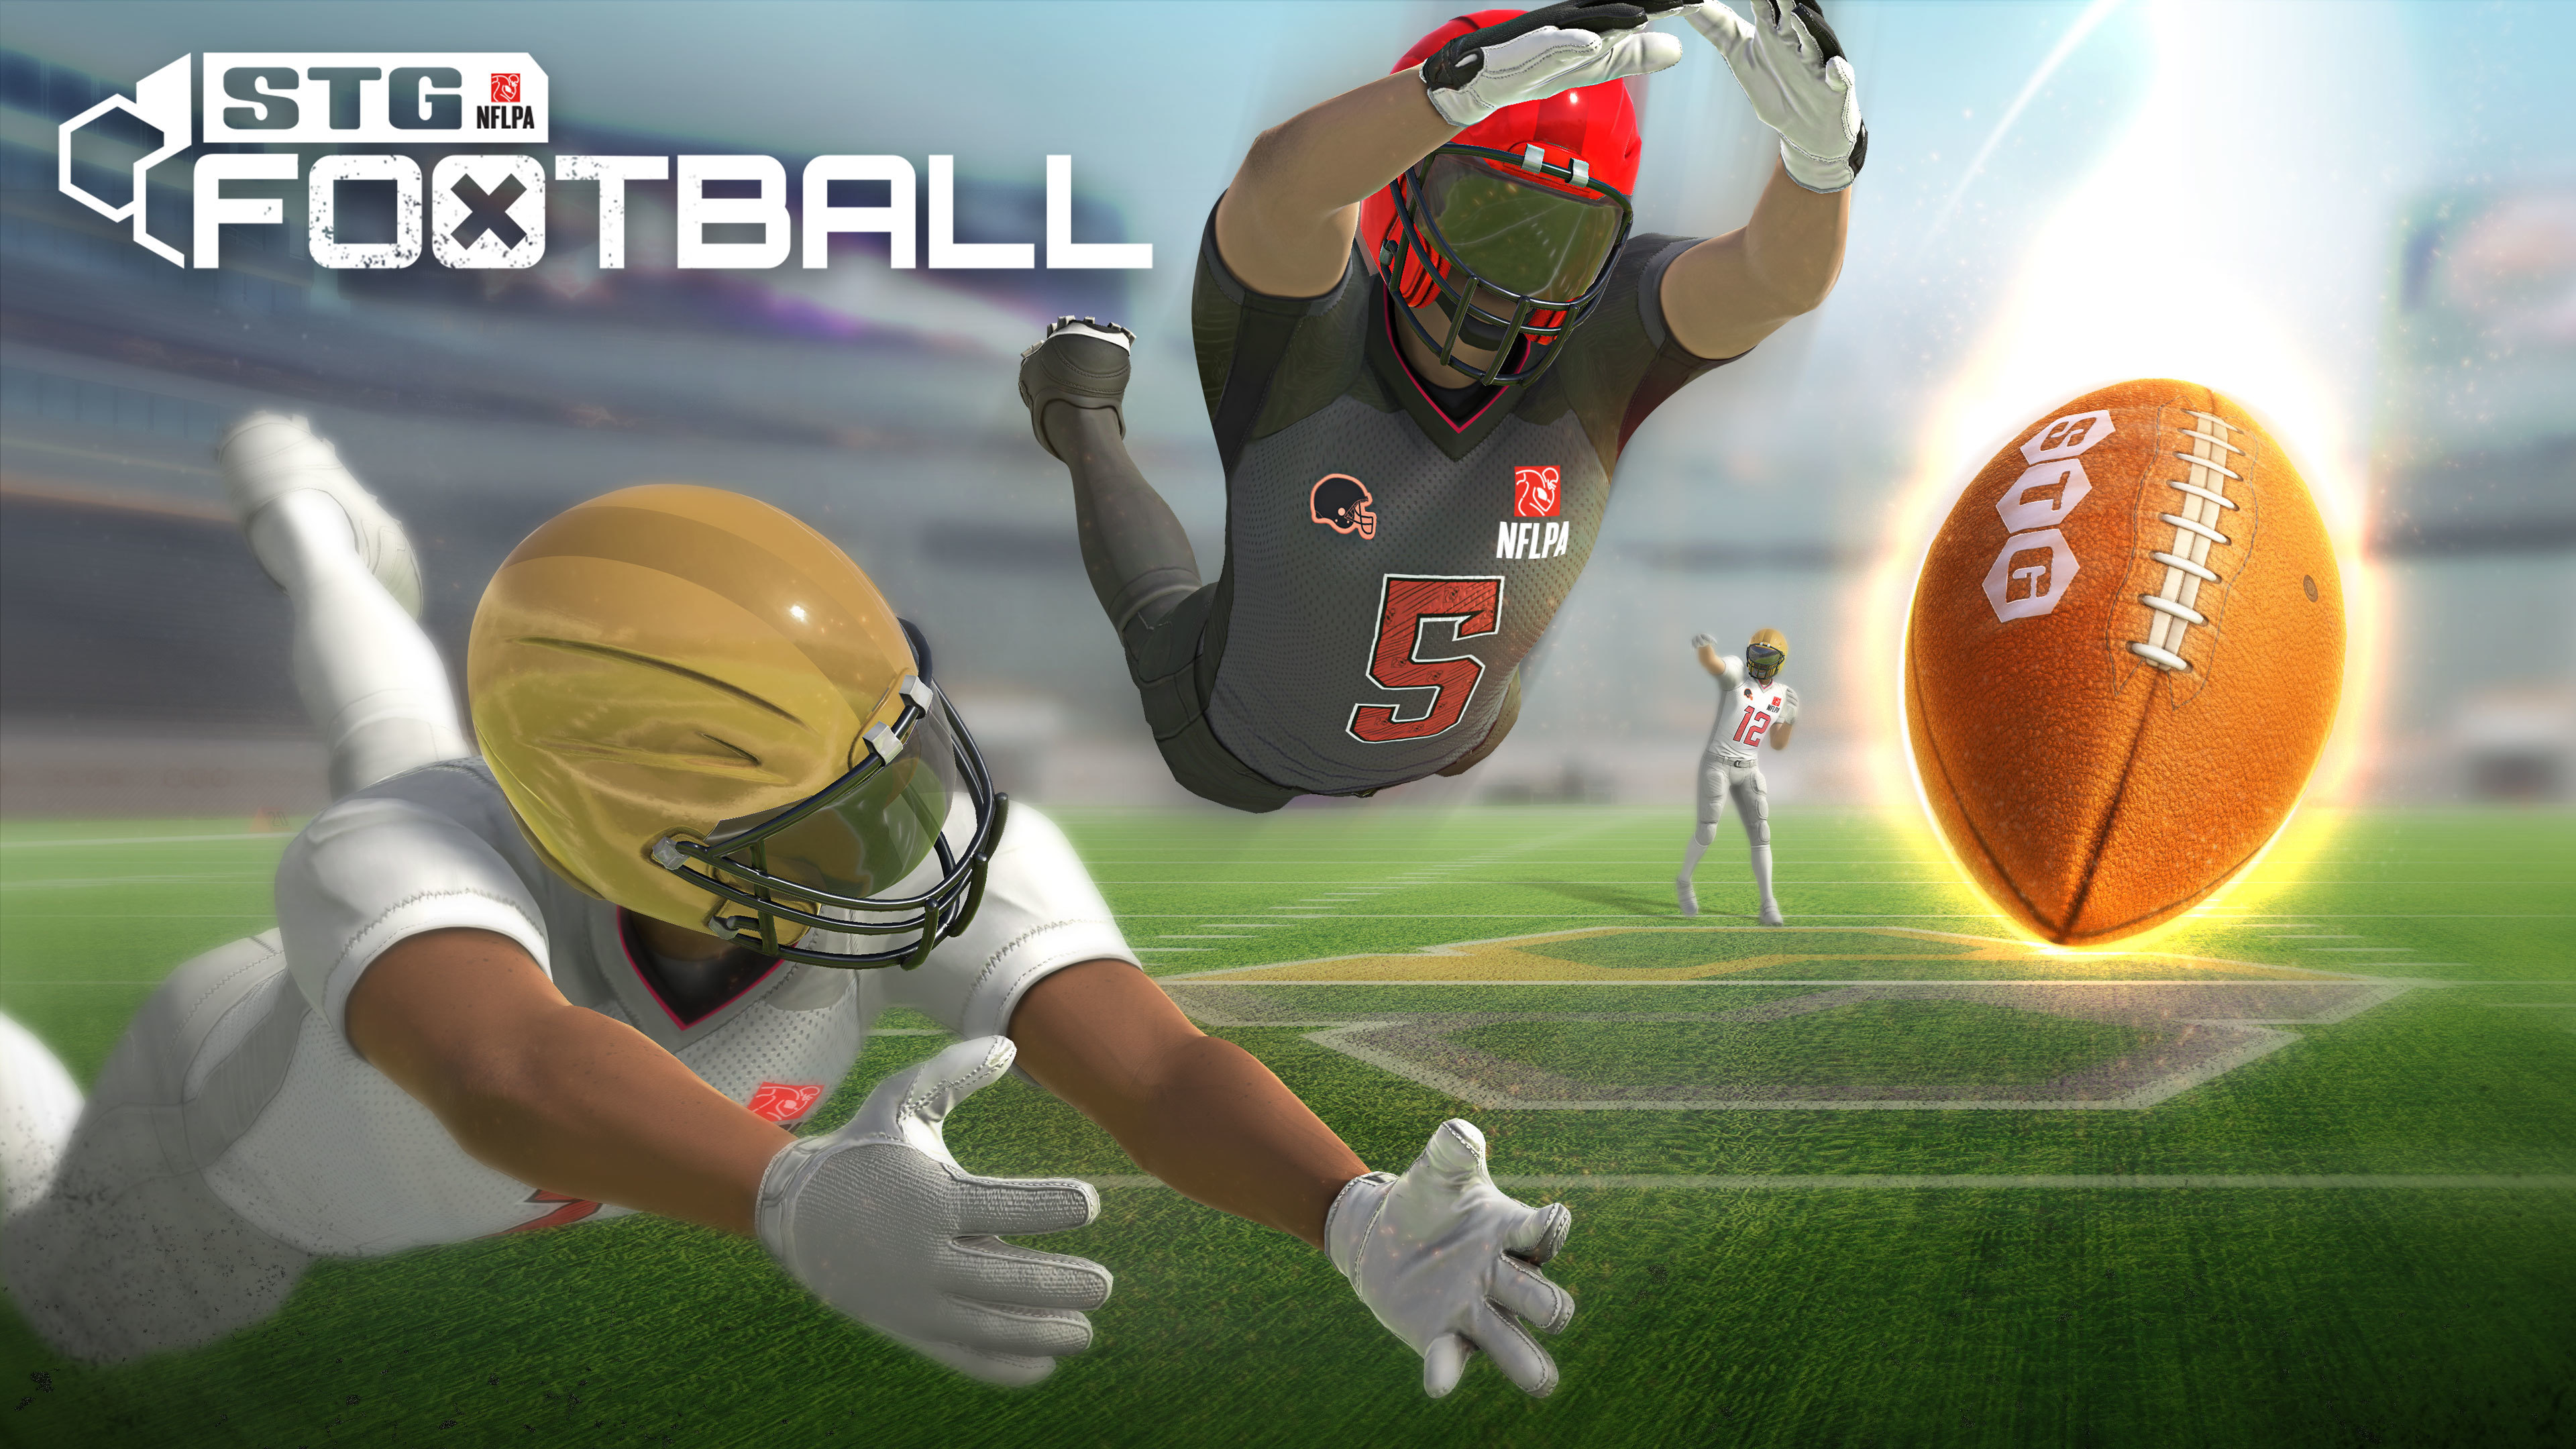 SuperTeam Games, the NFLPA and OneTeam Partners Announce STG Football, A Refreshing Take on Sports Games Powered by Blockchain Technology NFLPA